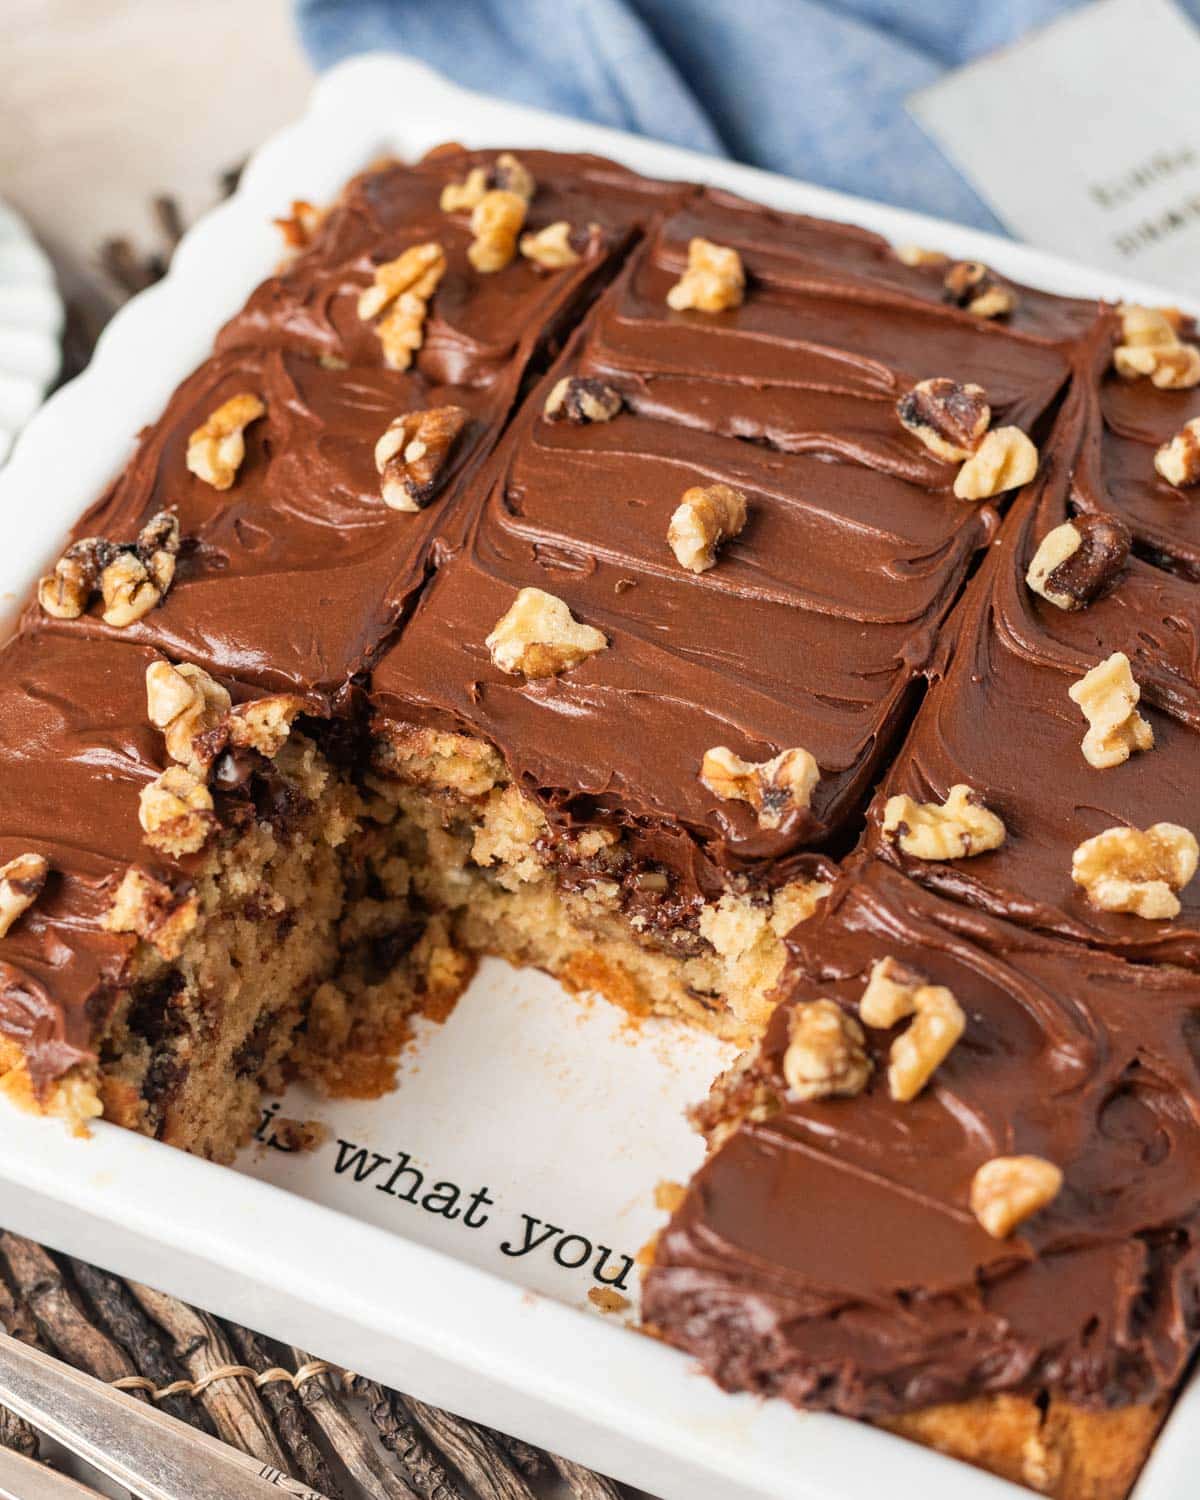 chocolate chip snack cake with chocolate frosting and walnuts on top